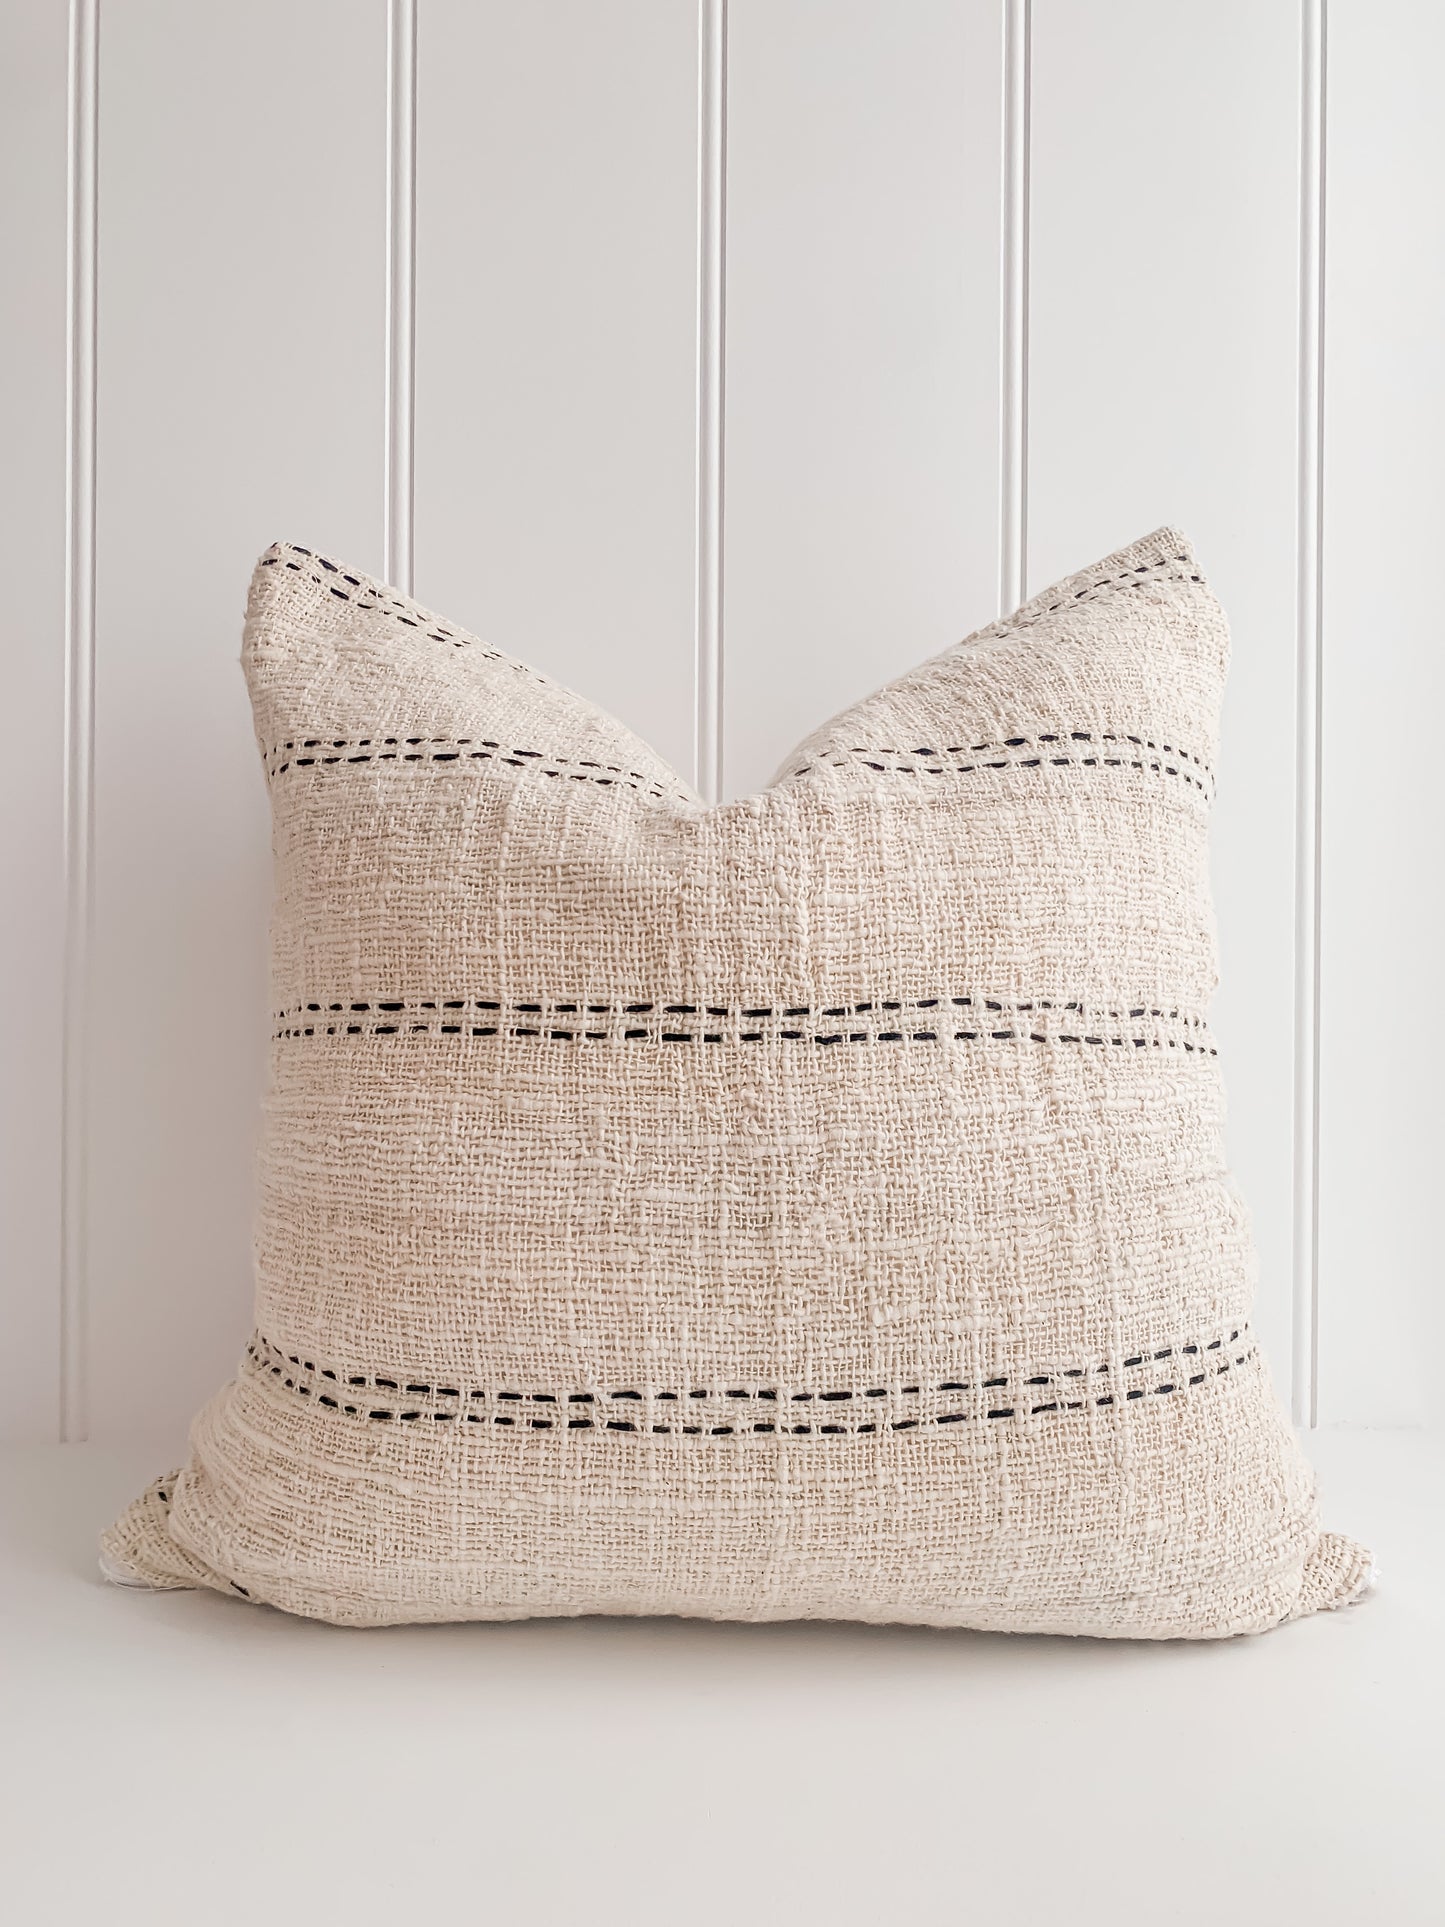 A simple Nyah | Stitch Cushion with natural colors on a white surface.